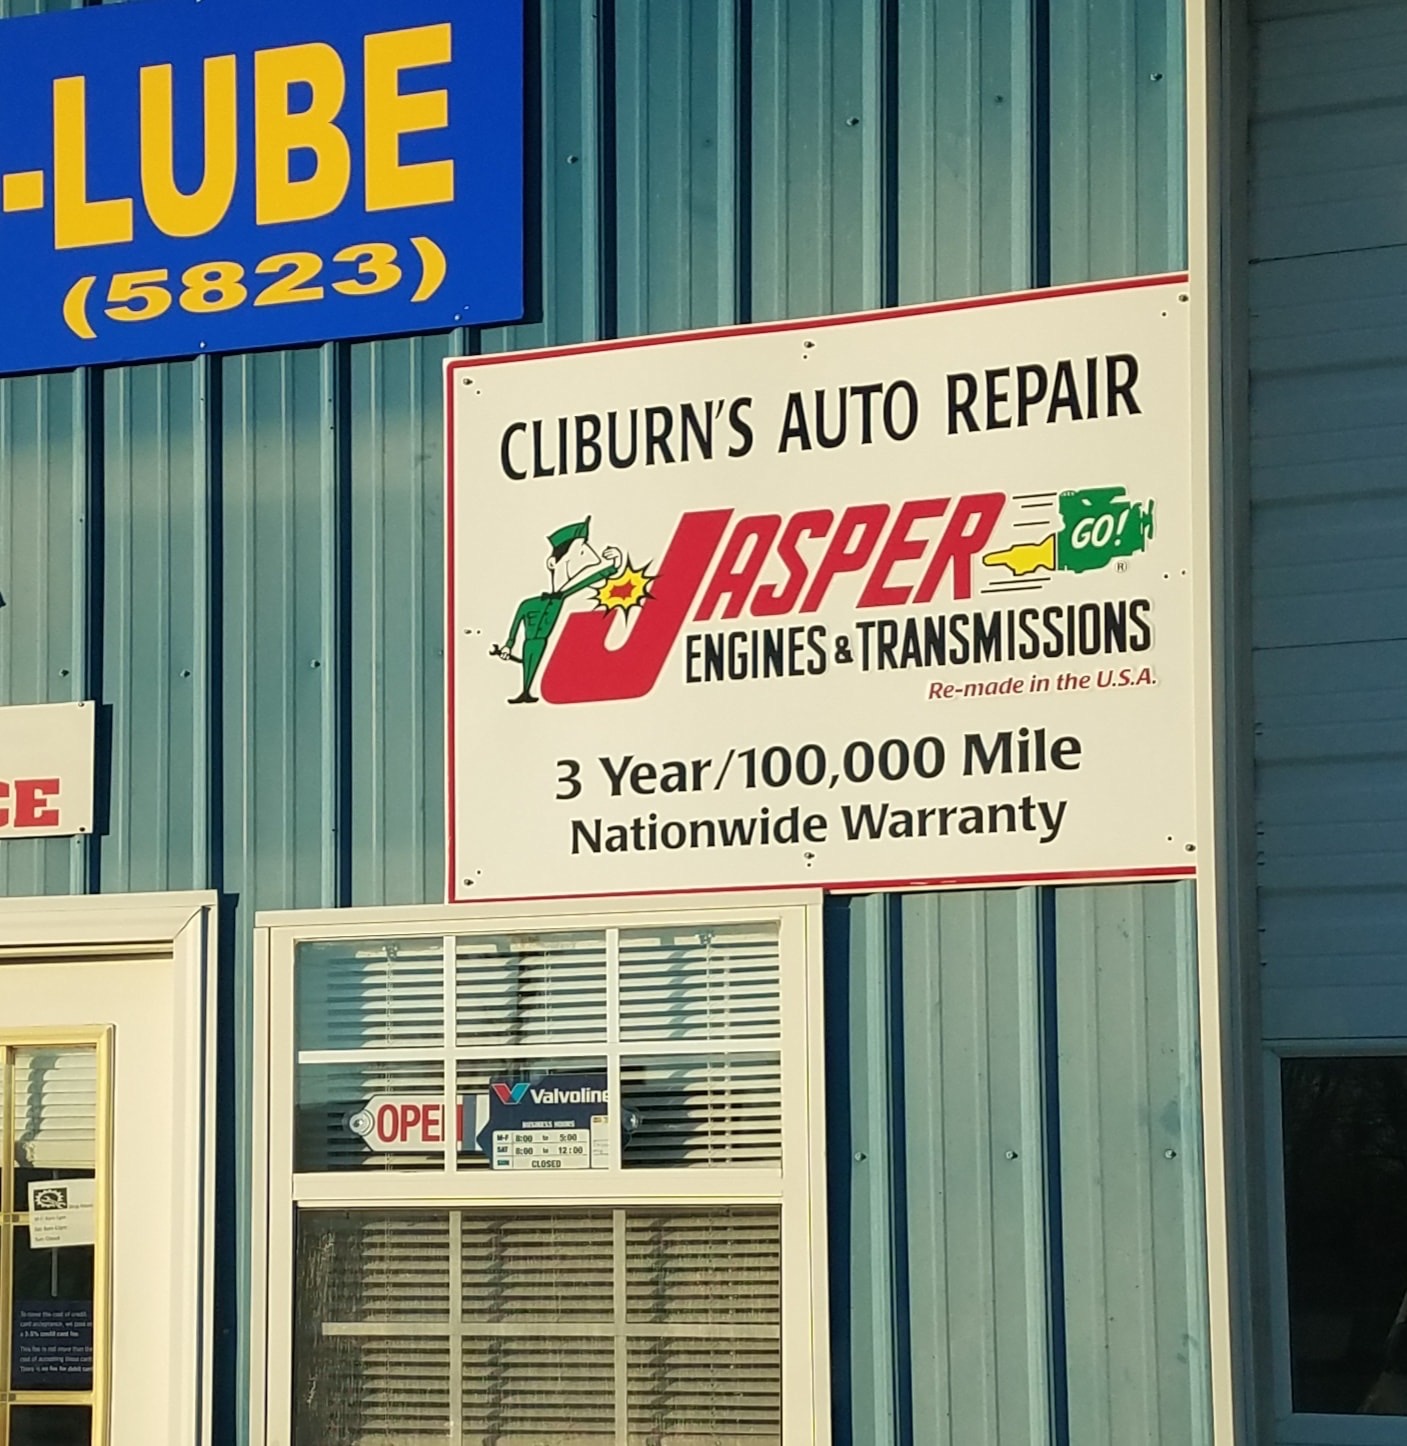 Cliburn's Auto Repair and Pit Crew Express Lube 203 Hwy 52 E, Lafayette Tennessee 37083